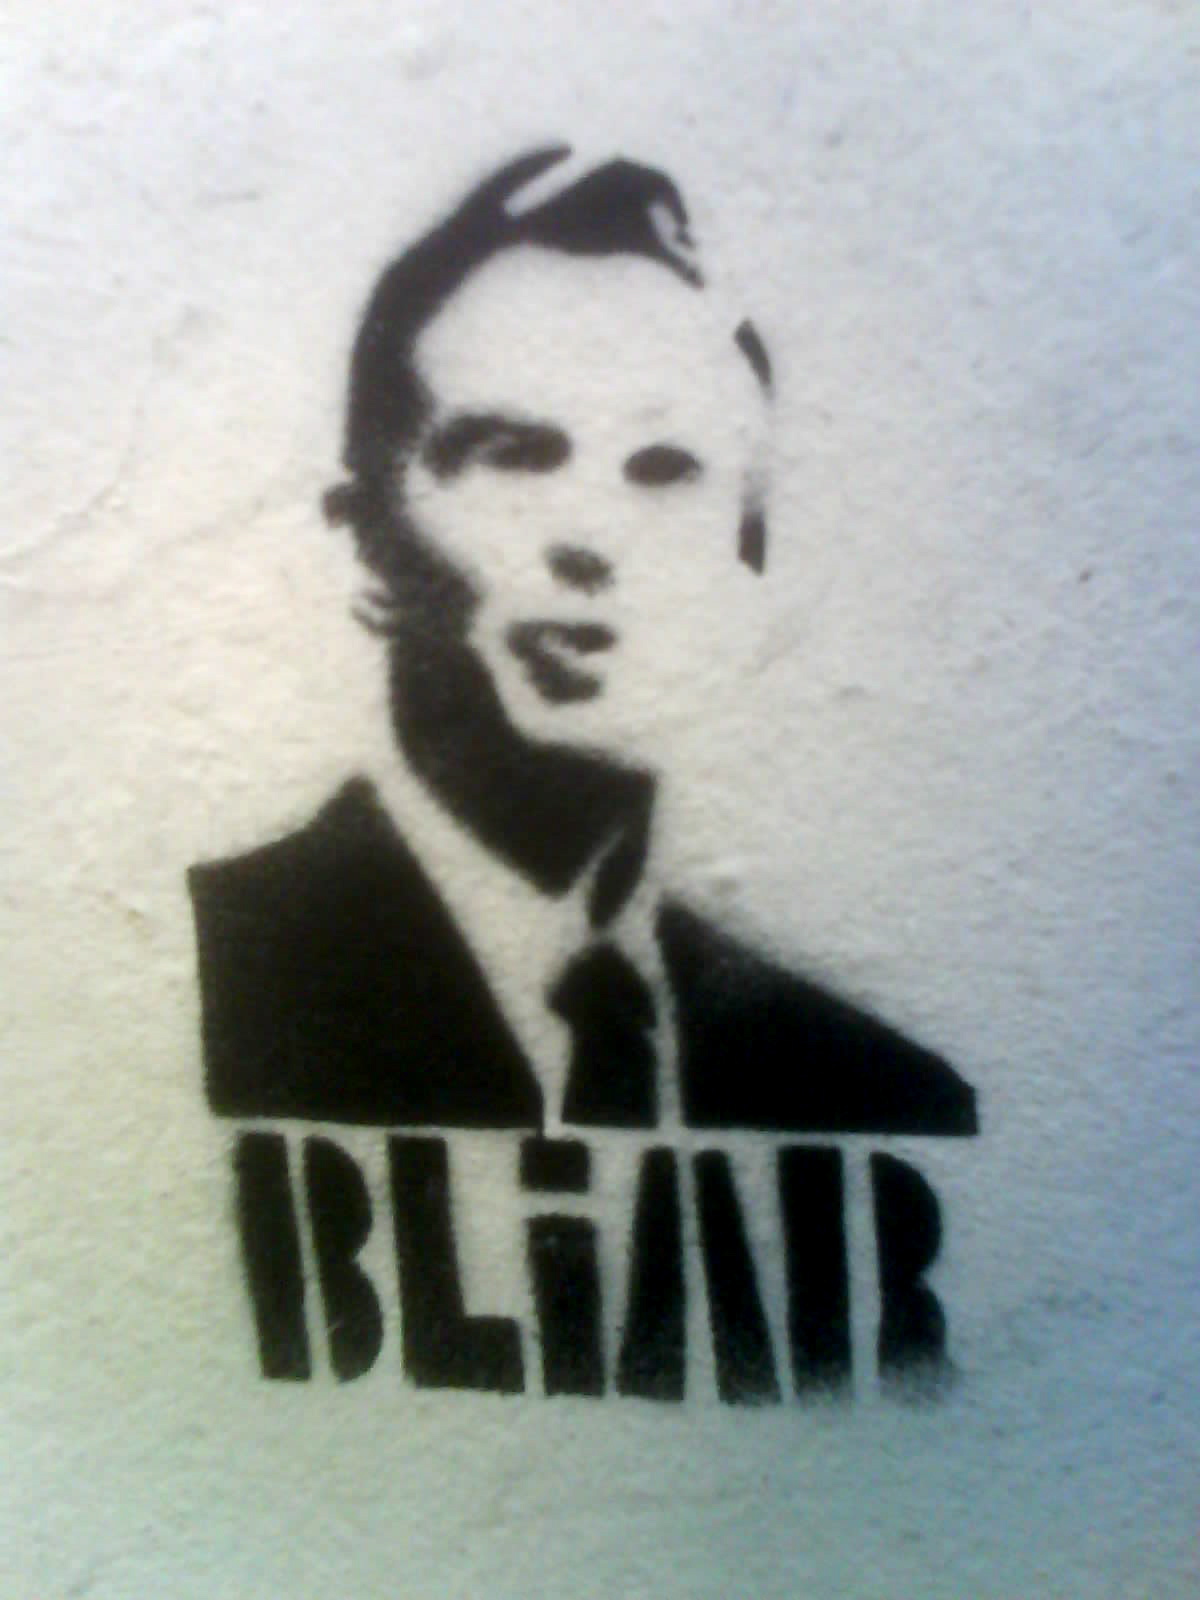 a stencil depicting a man's name on a wall